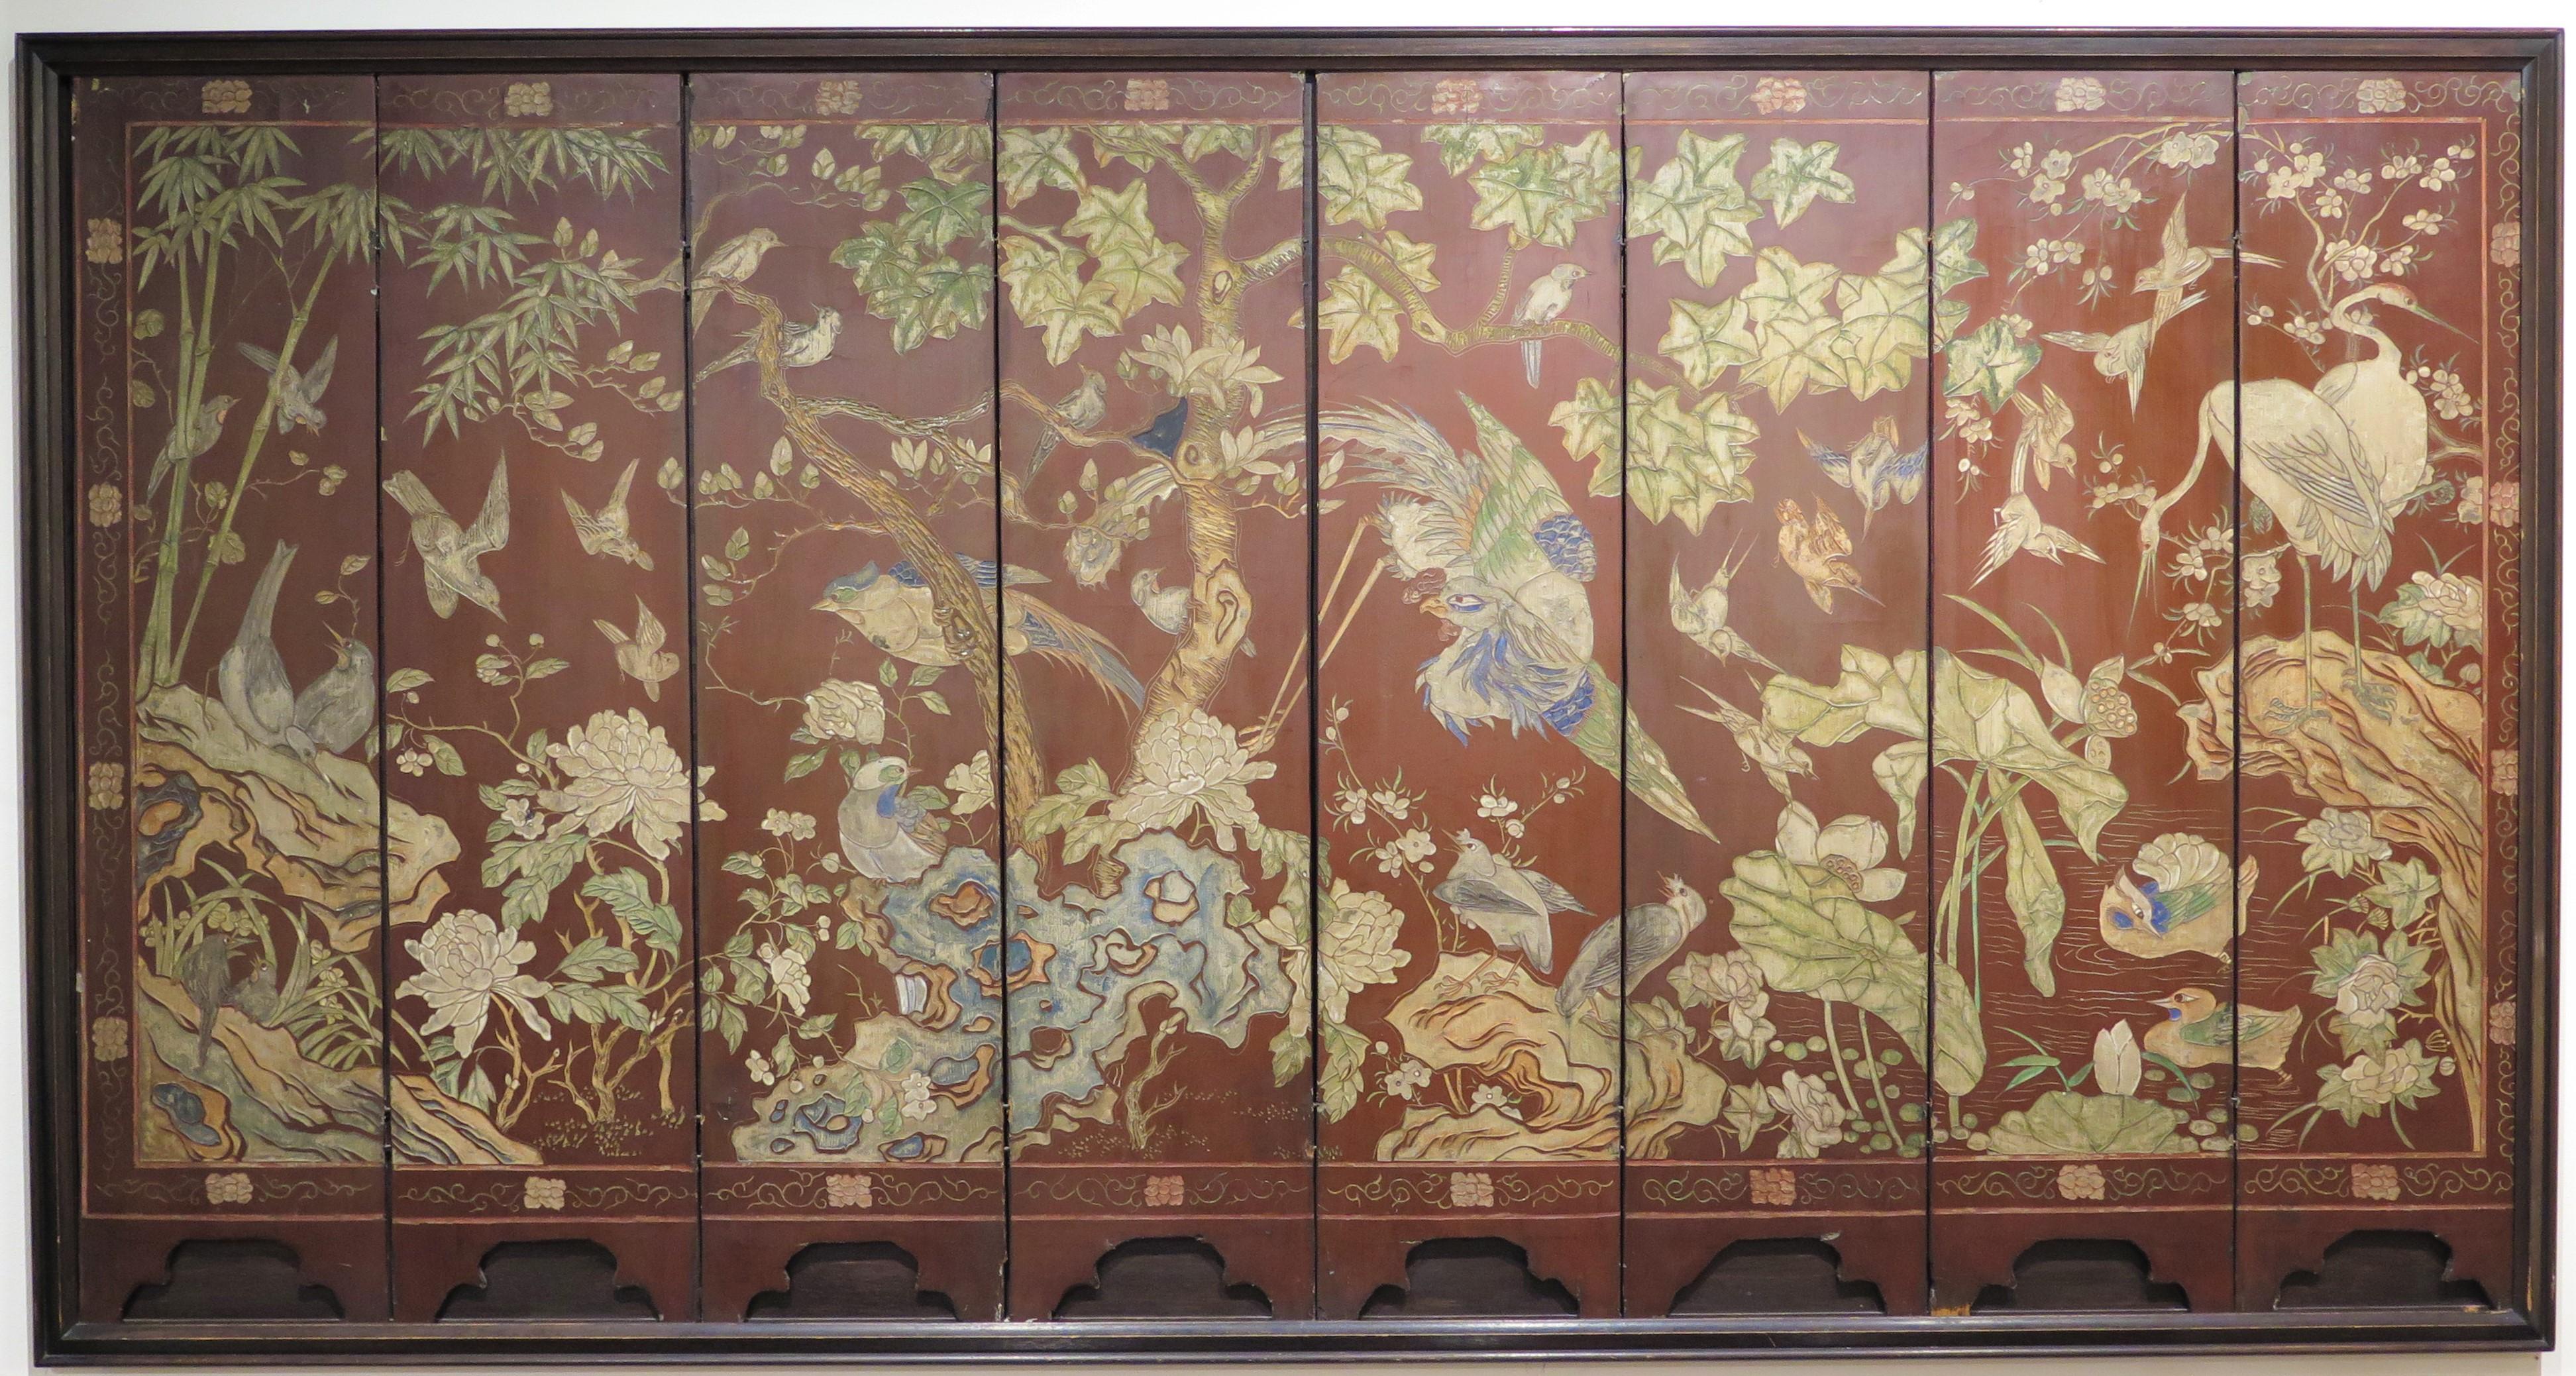 Fine Late 18th early 19th Century eight (8) panel Chinese coromandel framed screen. All the panels are finely Carved and hand-painted with images of birds, flowers and foliage against a cinnamon background. China. Circa 1800 

48.75